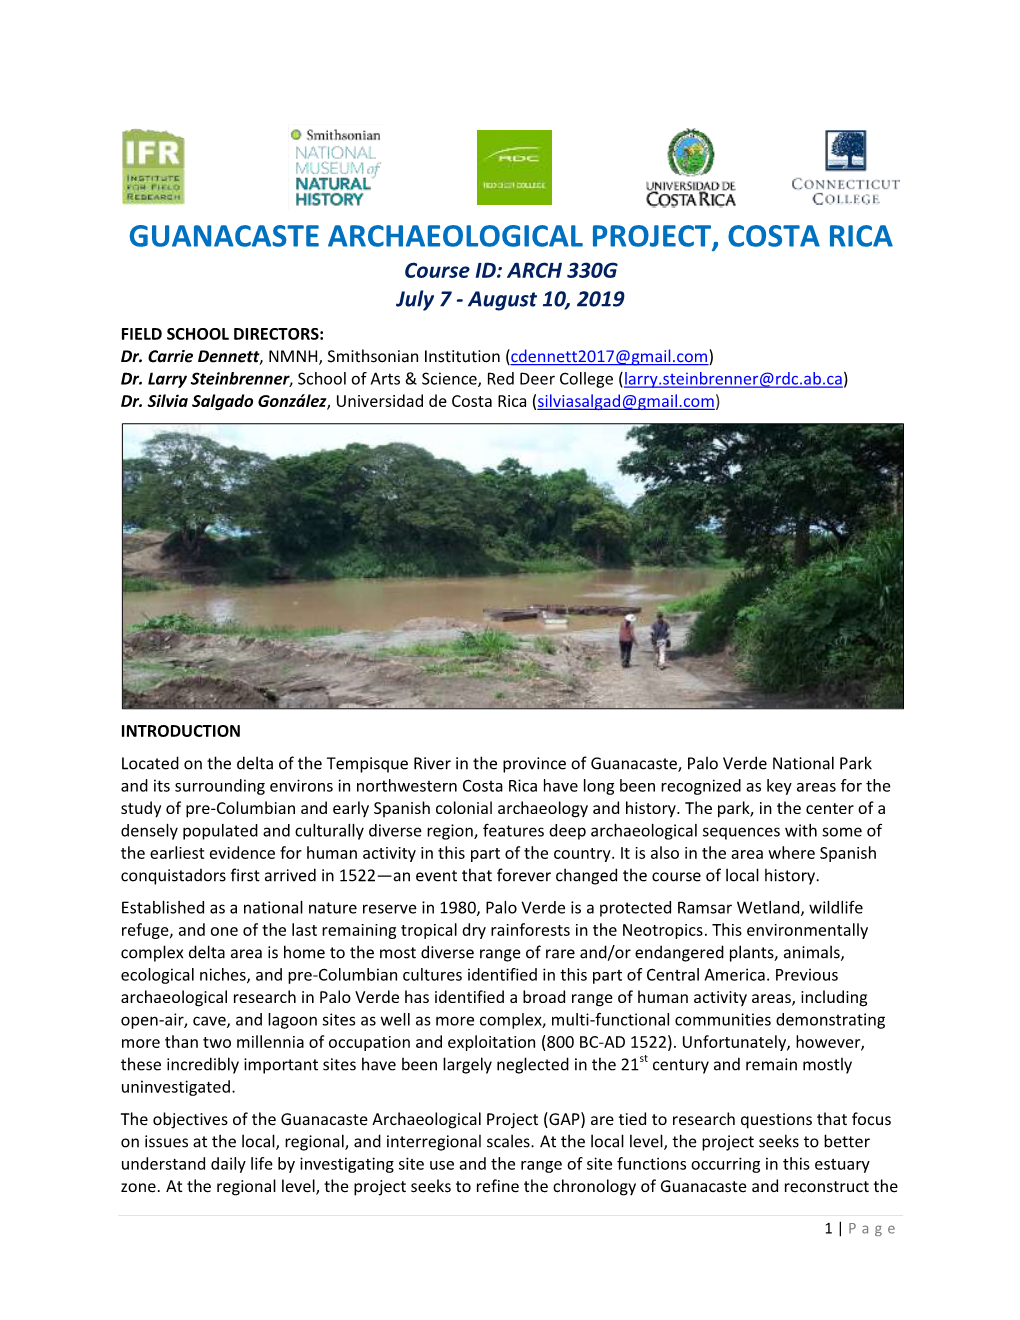 GUANACASTE ARCHAEOLOGICAL PROJECT, COSTA RICA Course ID: ARCH 330G July 7 - August 10, 2019 FIELD SCHOOL DIRECTORS: Dr